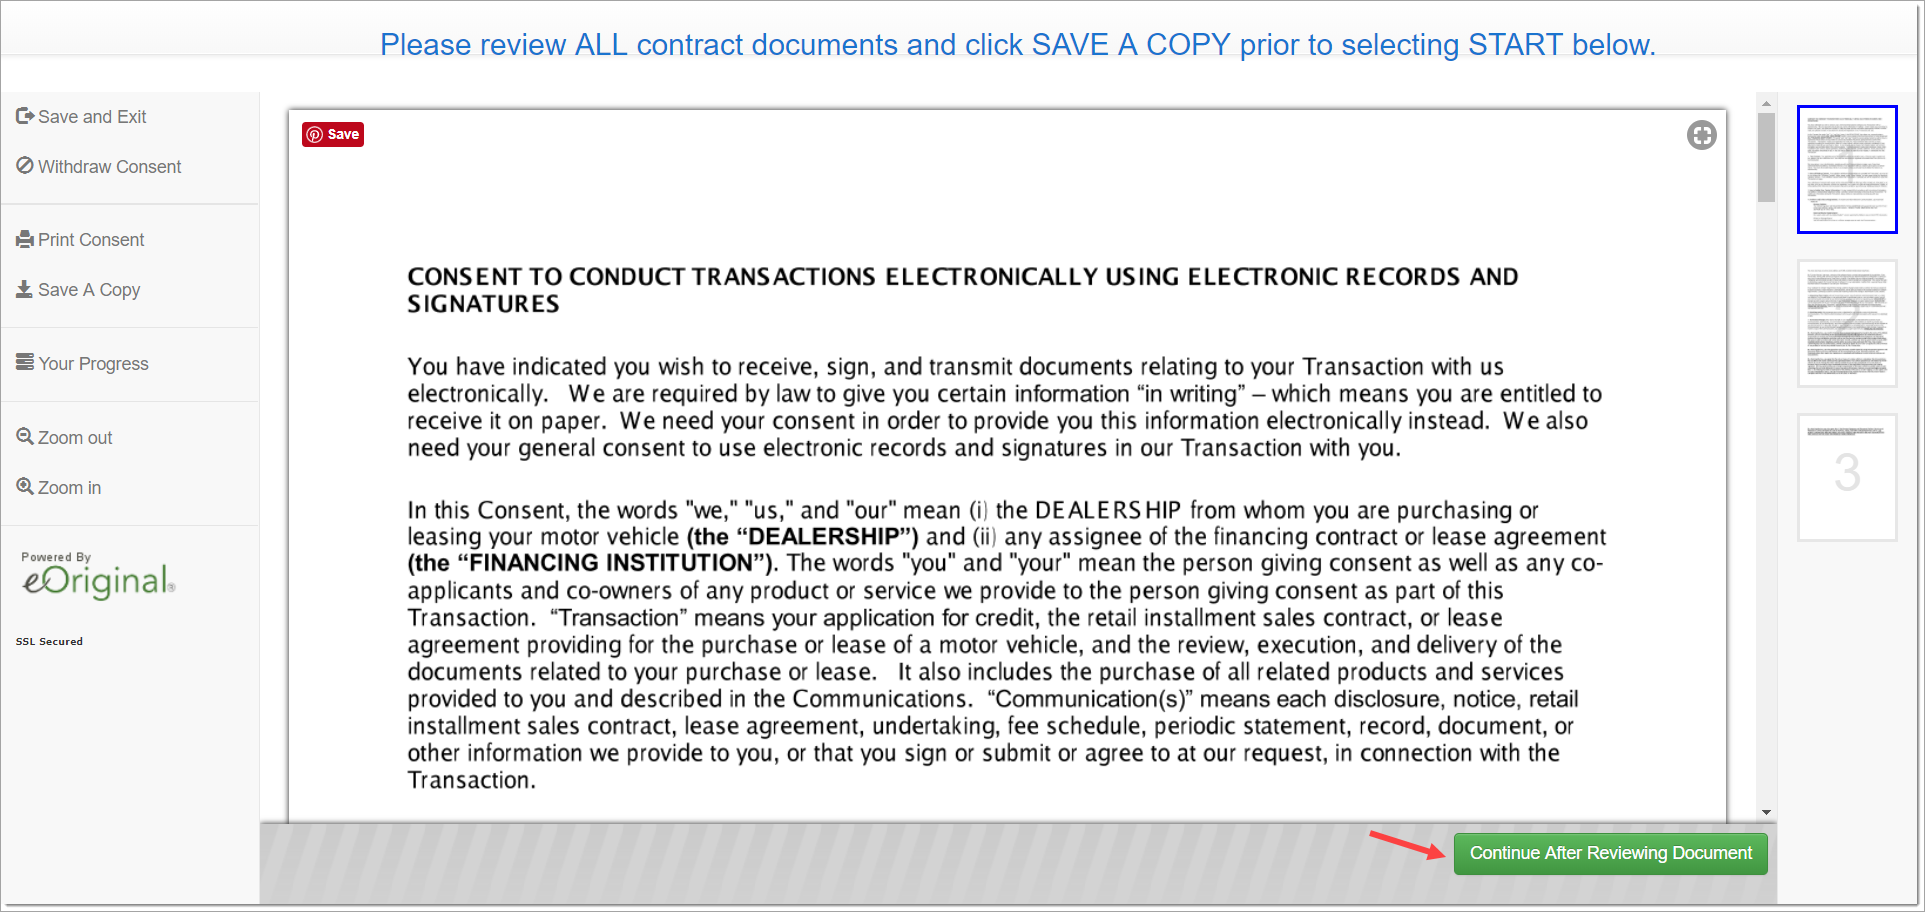 In signing room, review ‘ESIGN Consent’ document, click ‘Continue After Reviewing Document’